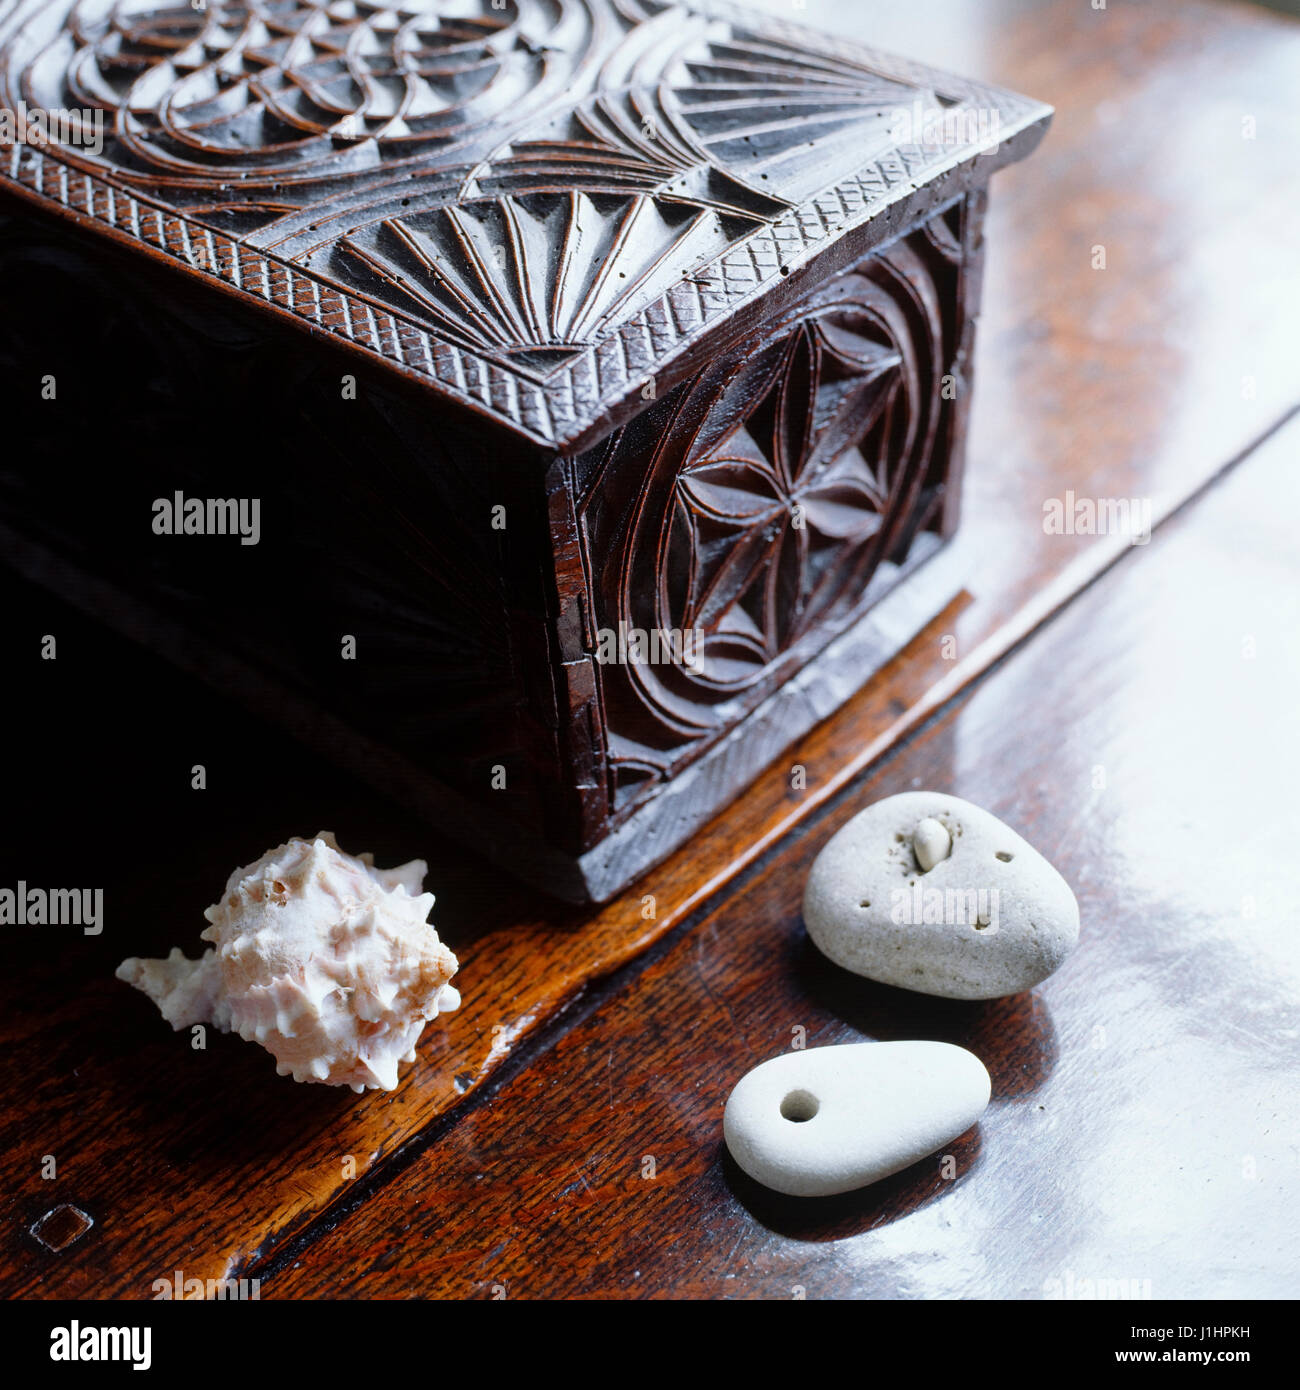 'Carved wooden box, seashell and pebbles.' Stock Photo